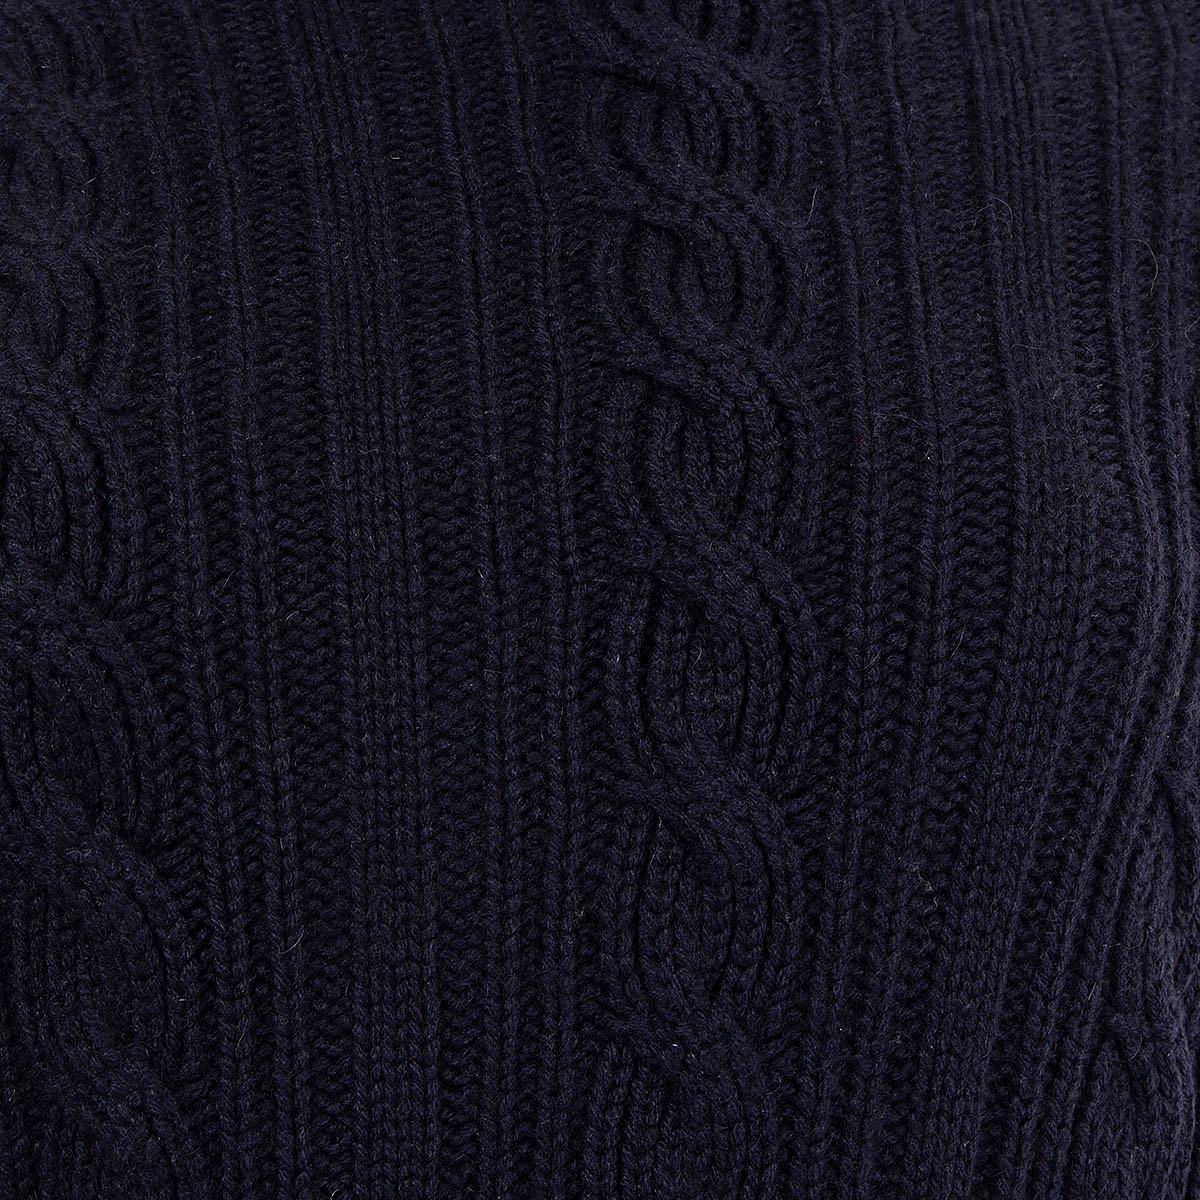 Women's LORO PIANA navy blue cashmere CABLE KNIT TURTLENECK PONCHO Sweater 42 M For Sale